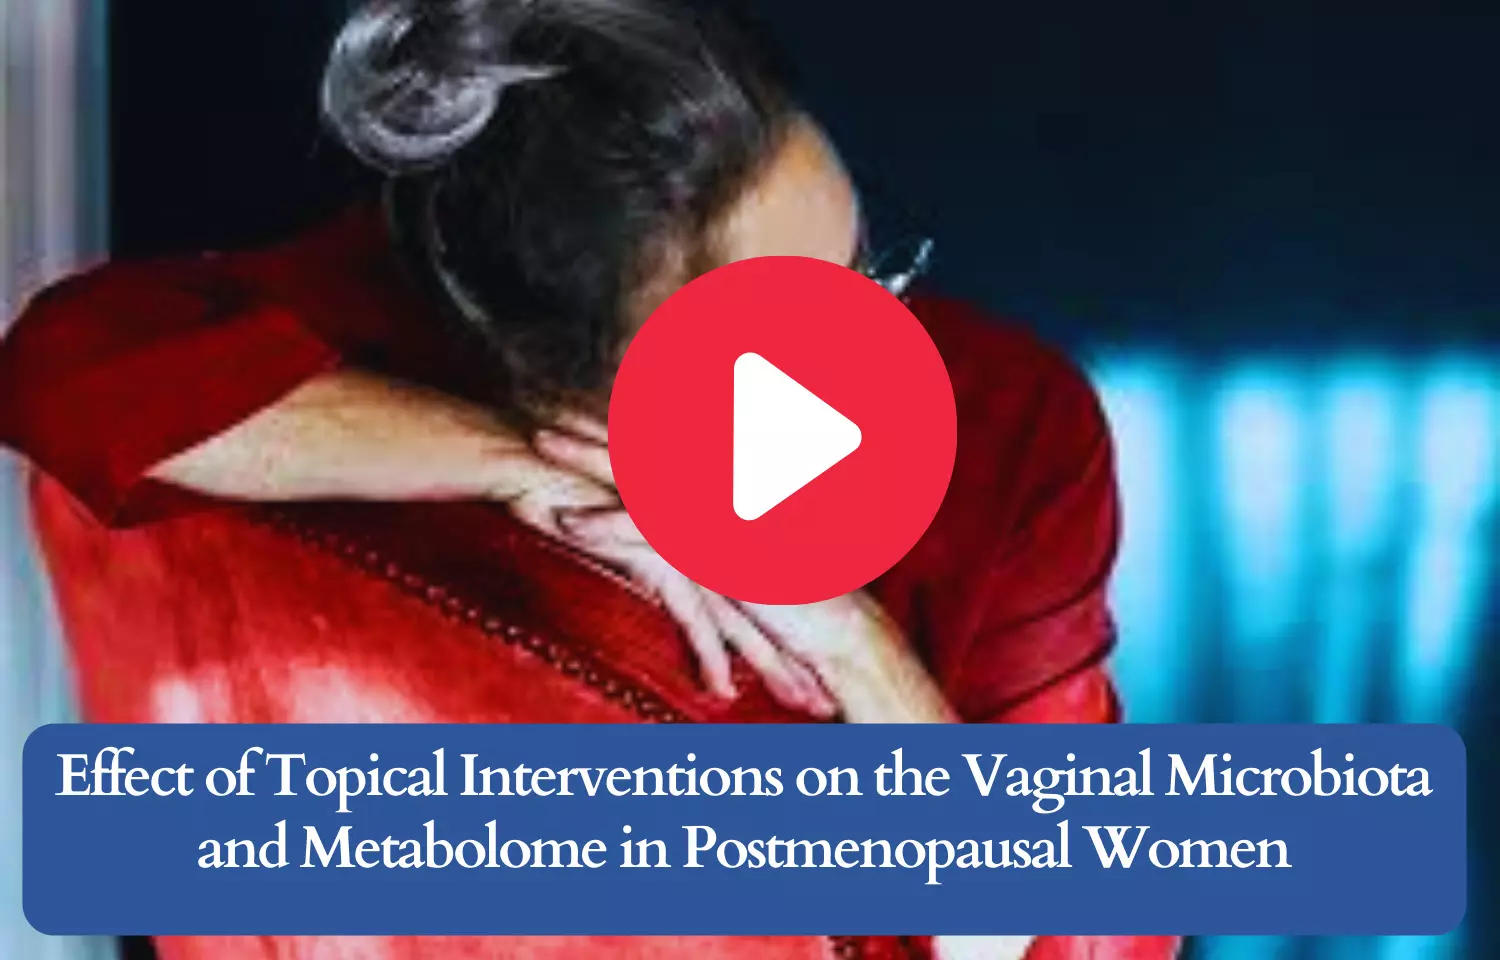 Topical interventions on Vaginal Microbiota and Metabolome in Postmenopausal Women effective